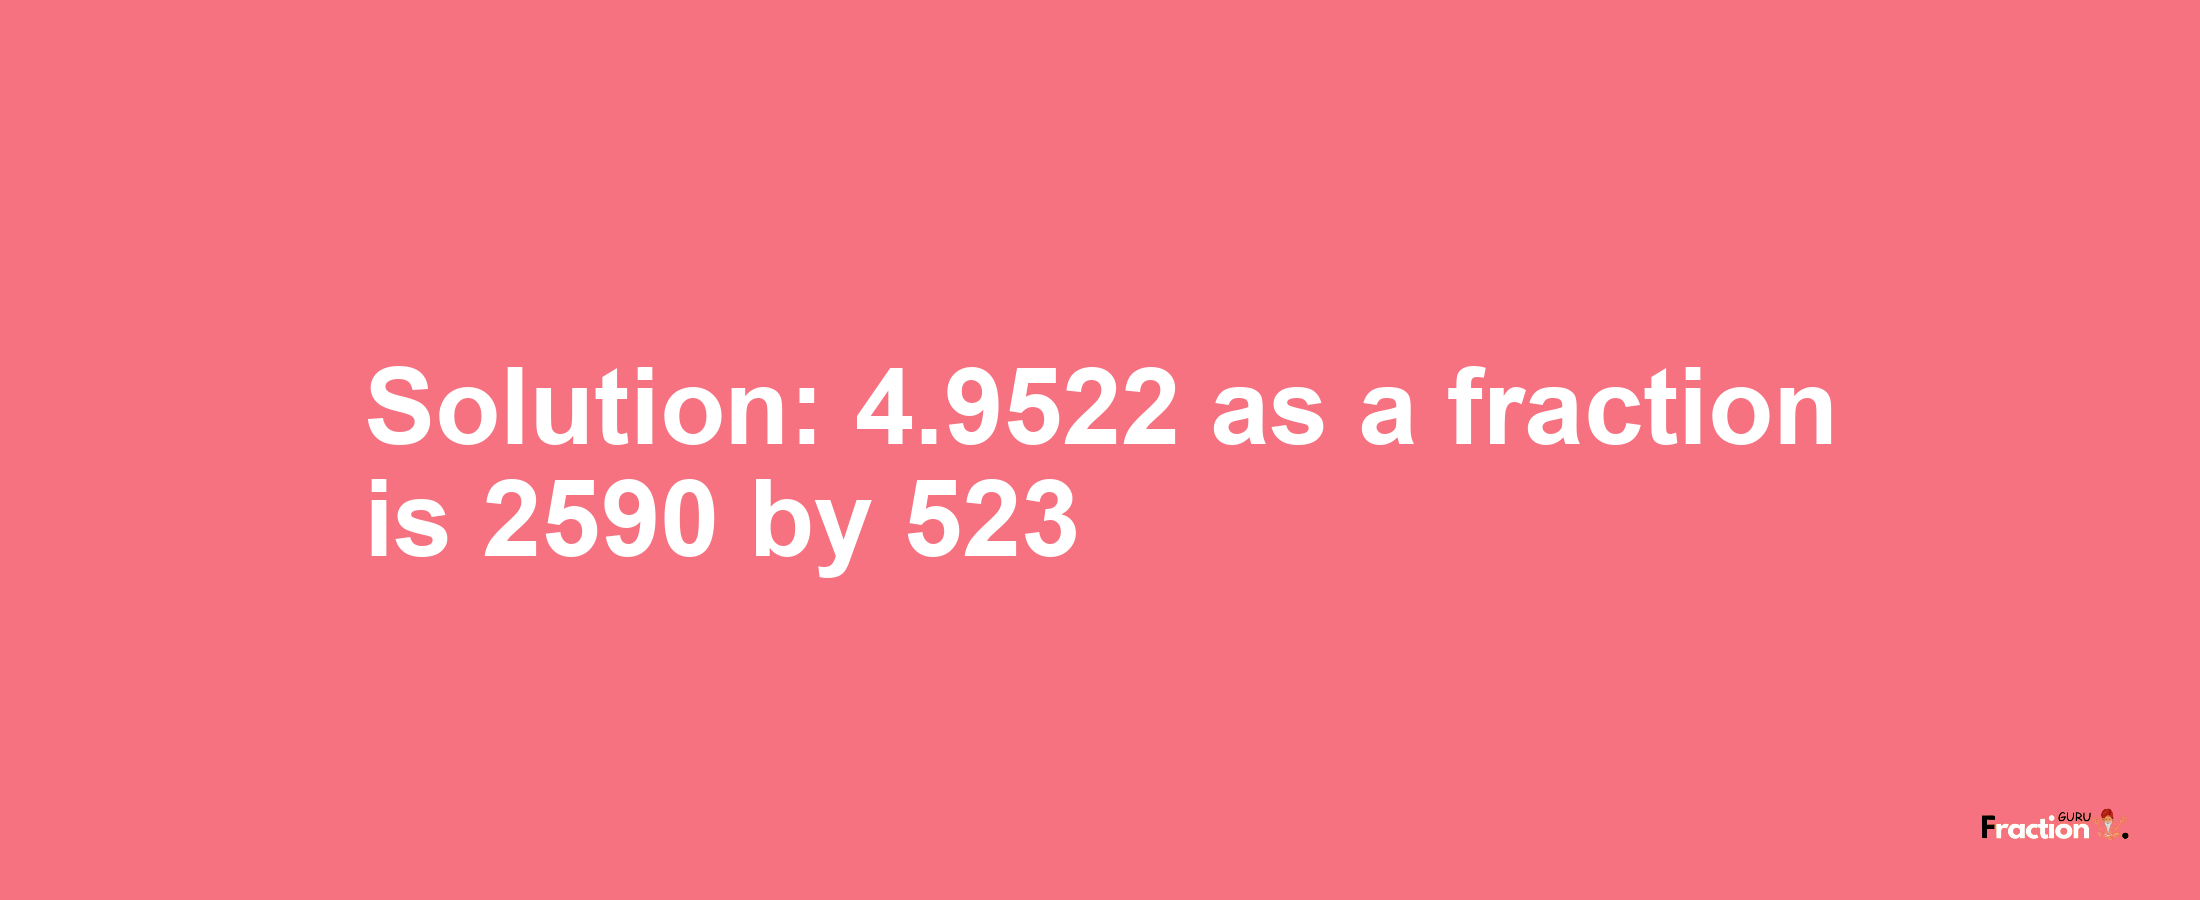 Solution:4.9522 as a fraction is 2590/523